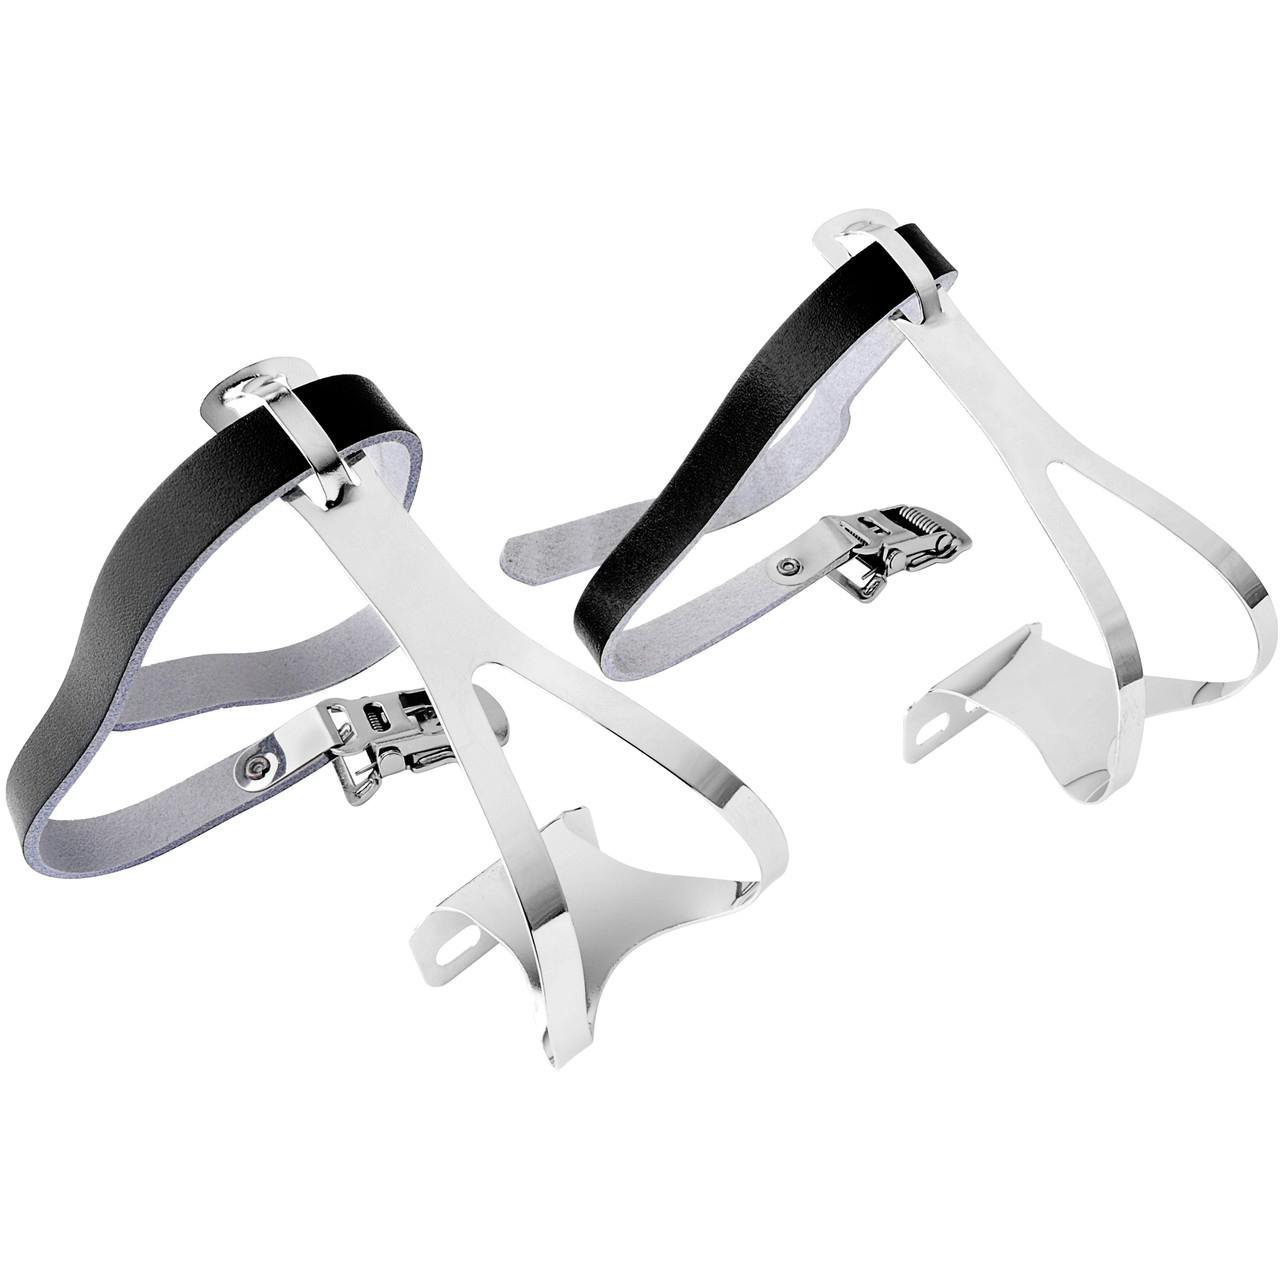 Metal Toe Clips& Leather Straps Black/Silver